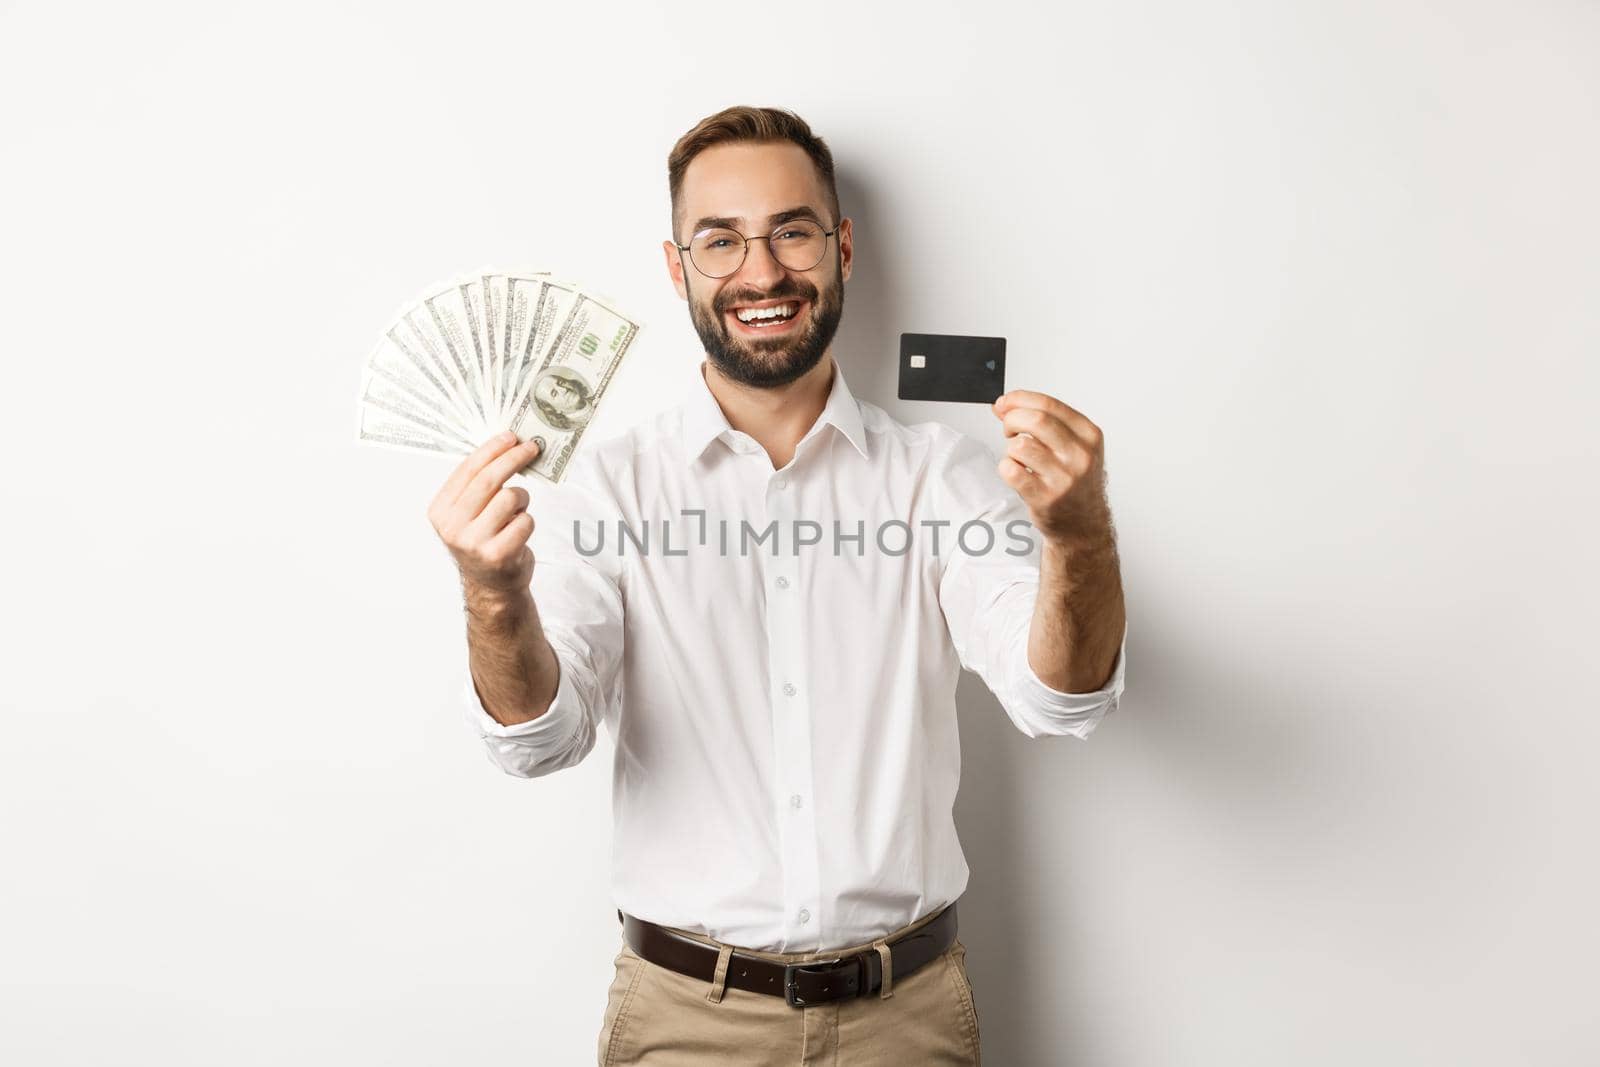 Happy young man showing his credit card and money dollars, smiling satisfied, standing over white background.